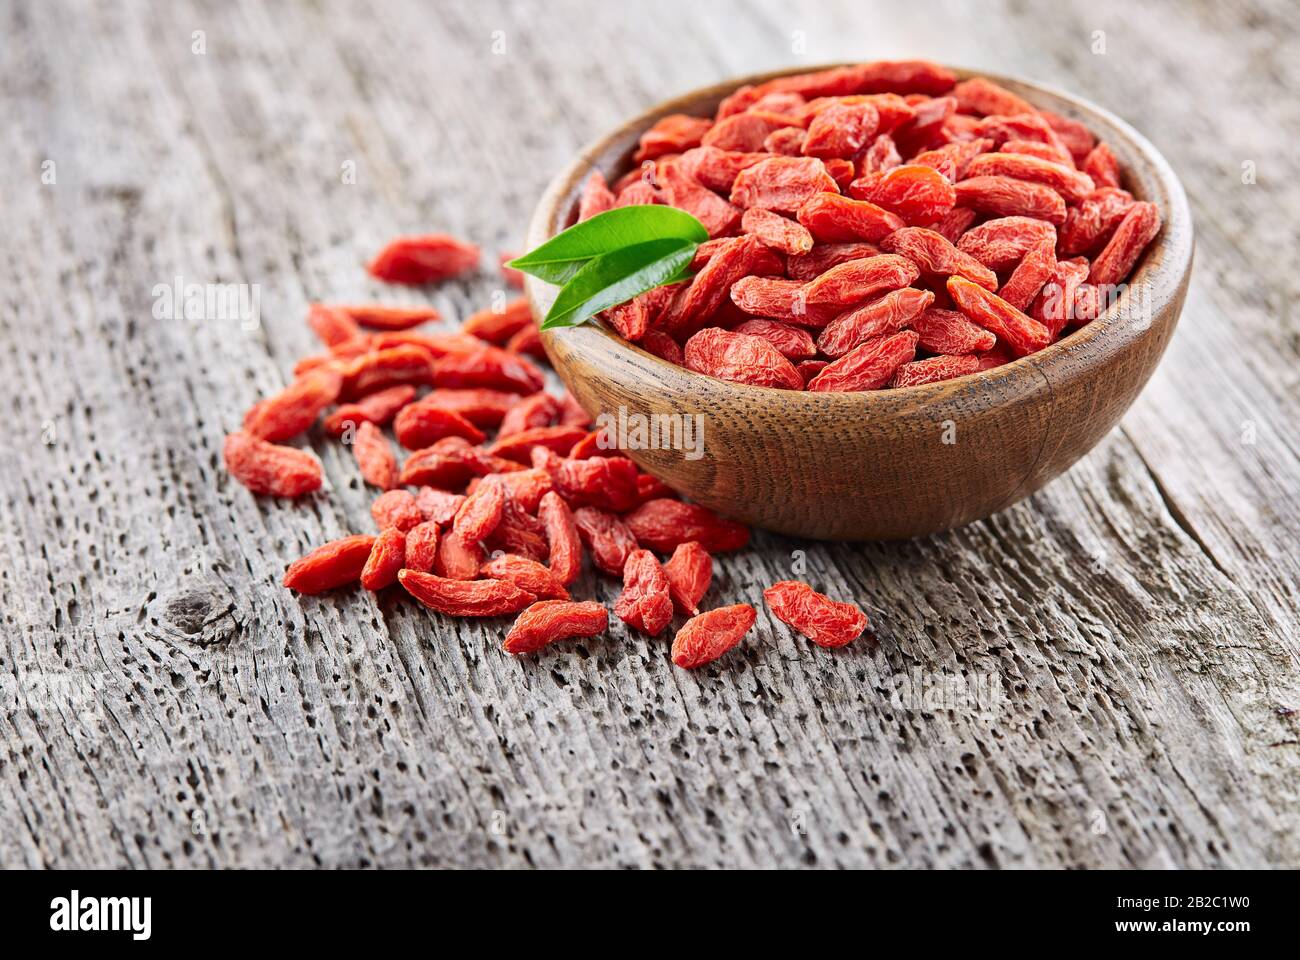 Goji Berries on a wooden background Banque D'Images